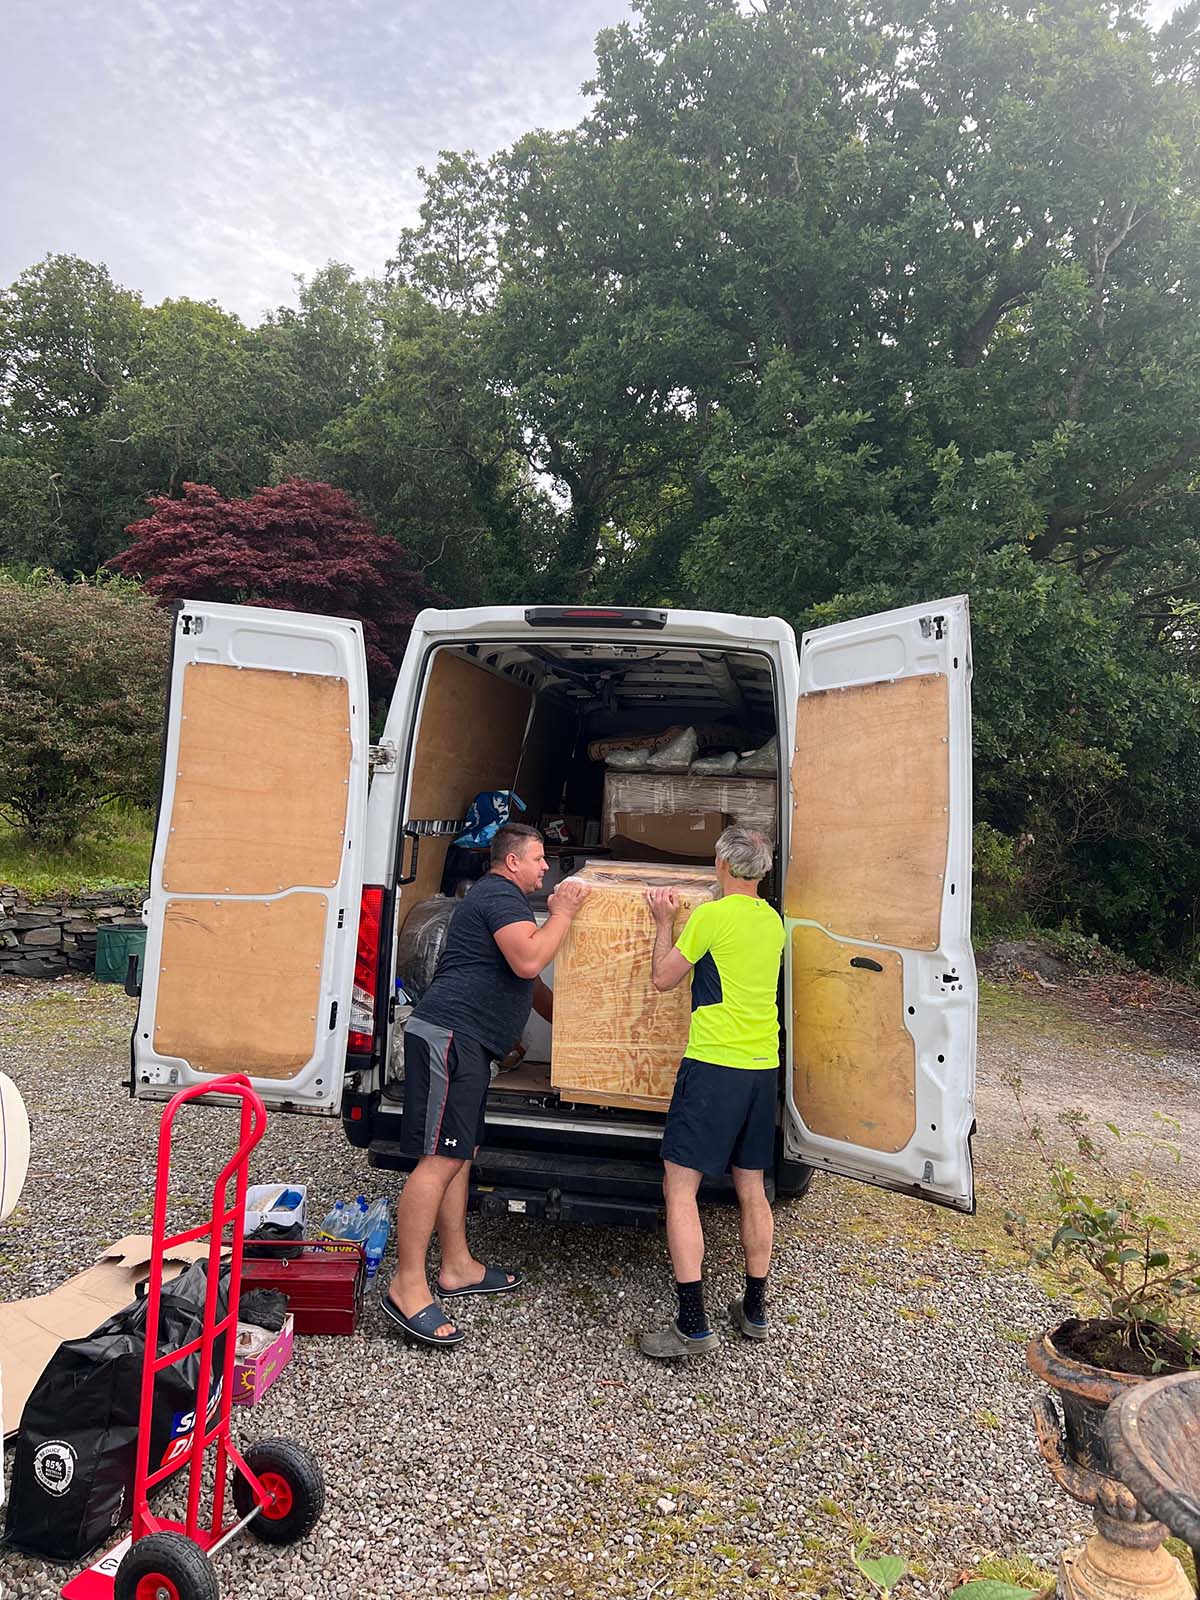 Builders unload a kitchen unit from the back of a van